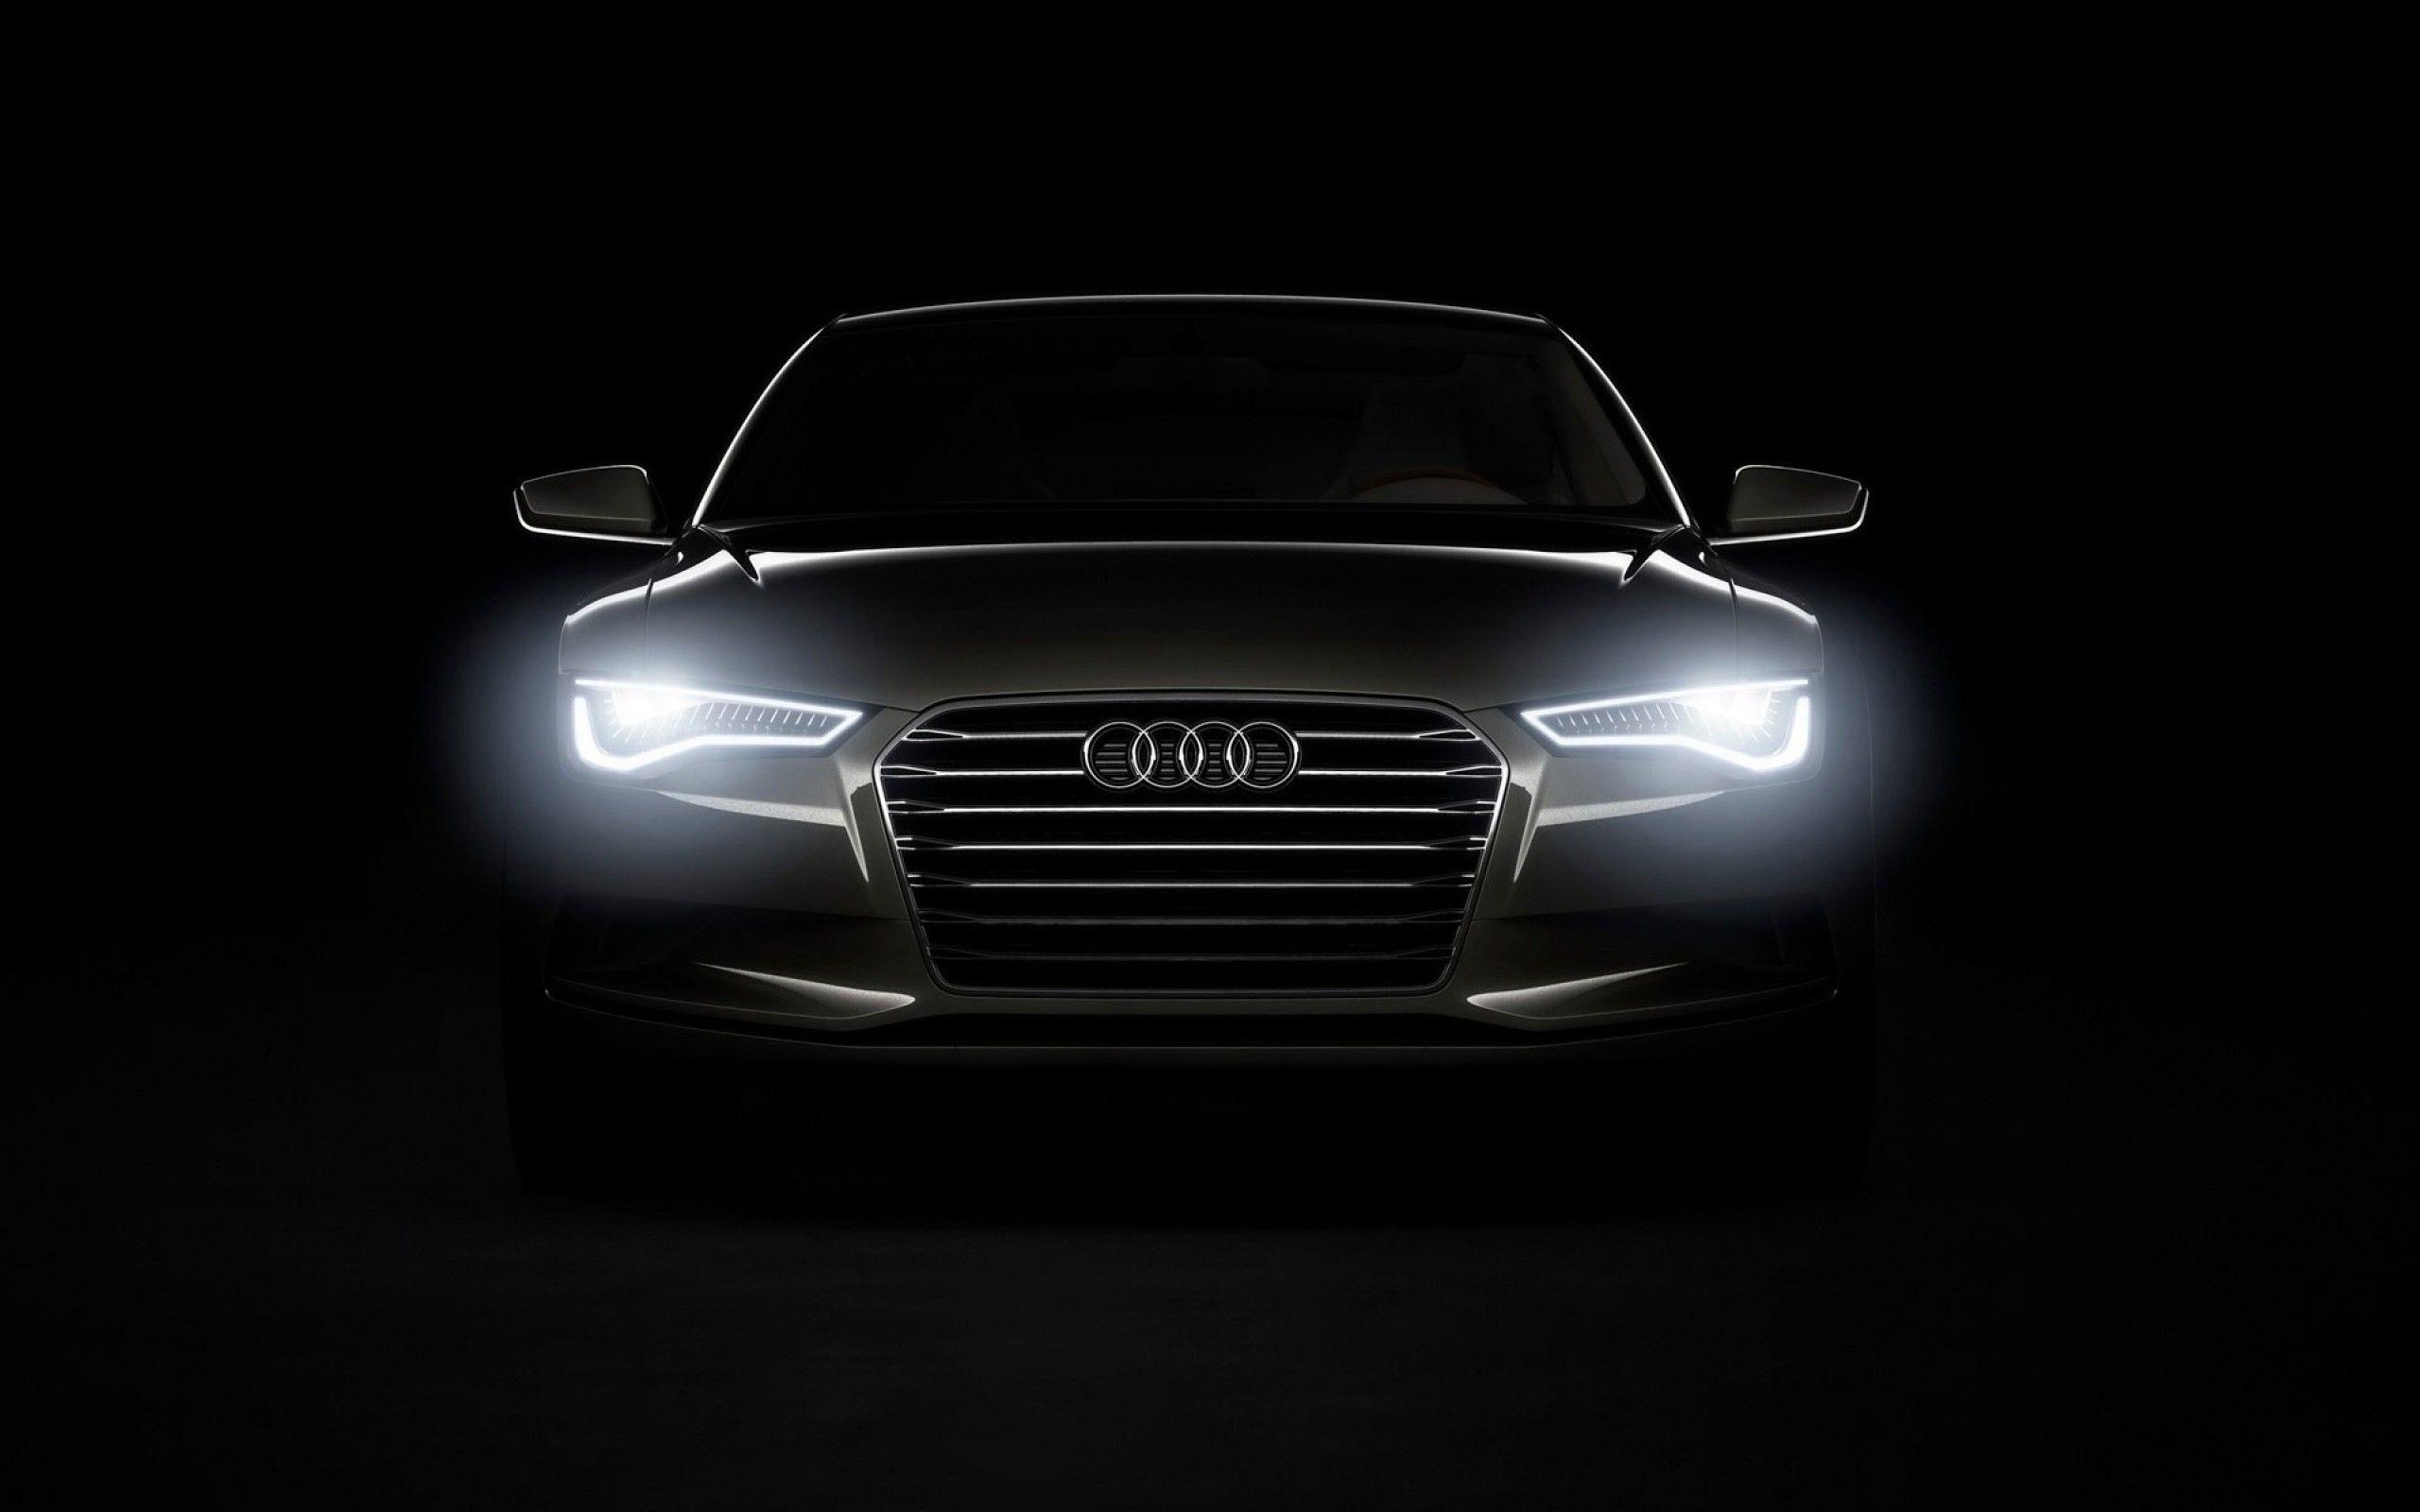 Desk 4K Of These 2K Audi Are Available To Cars Wallpaper Mobile